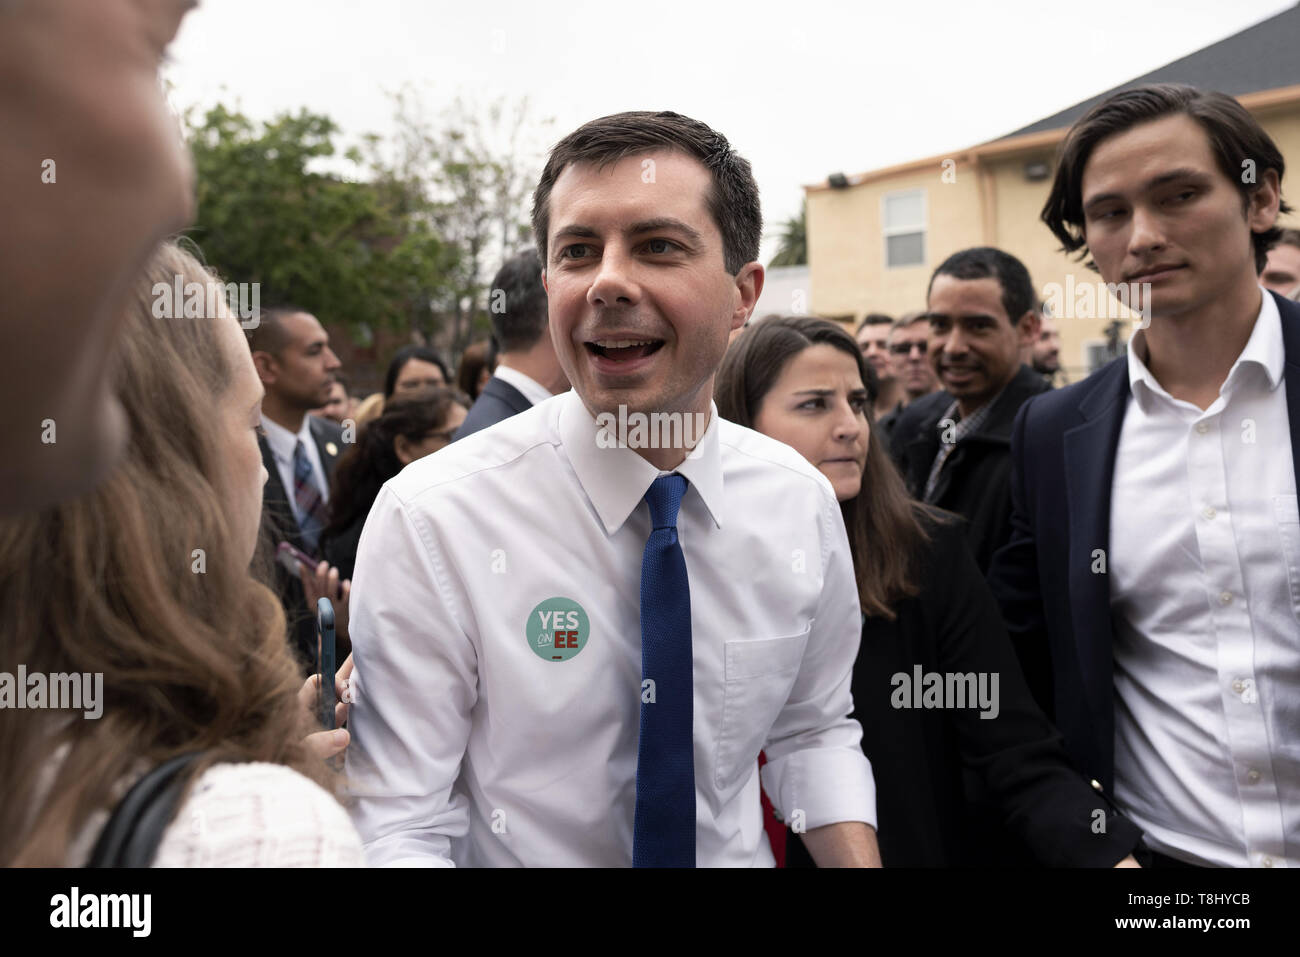 Los Angeles, CA, USA. 9th May, 2019. Democratic presidential candidate Mayor Pete Buttigieg greets people during a campaign rally in Los Angeles. Buttigieg is the mayor of South Bend, Indiana and a former naval intelligence officer. Credit: Ronen Tivony/SOPA Images/ZUMA Wire/Alamy Live News Stock Photo